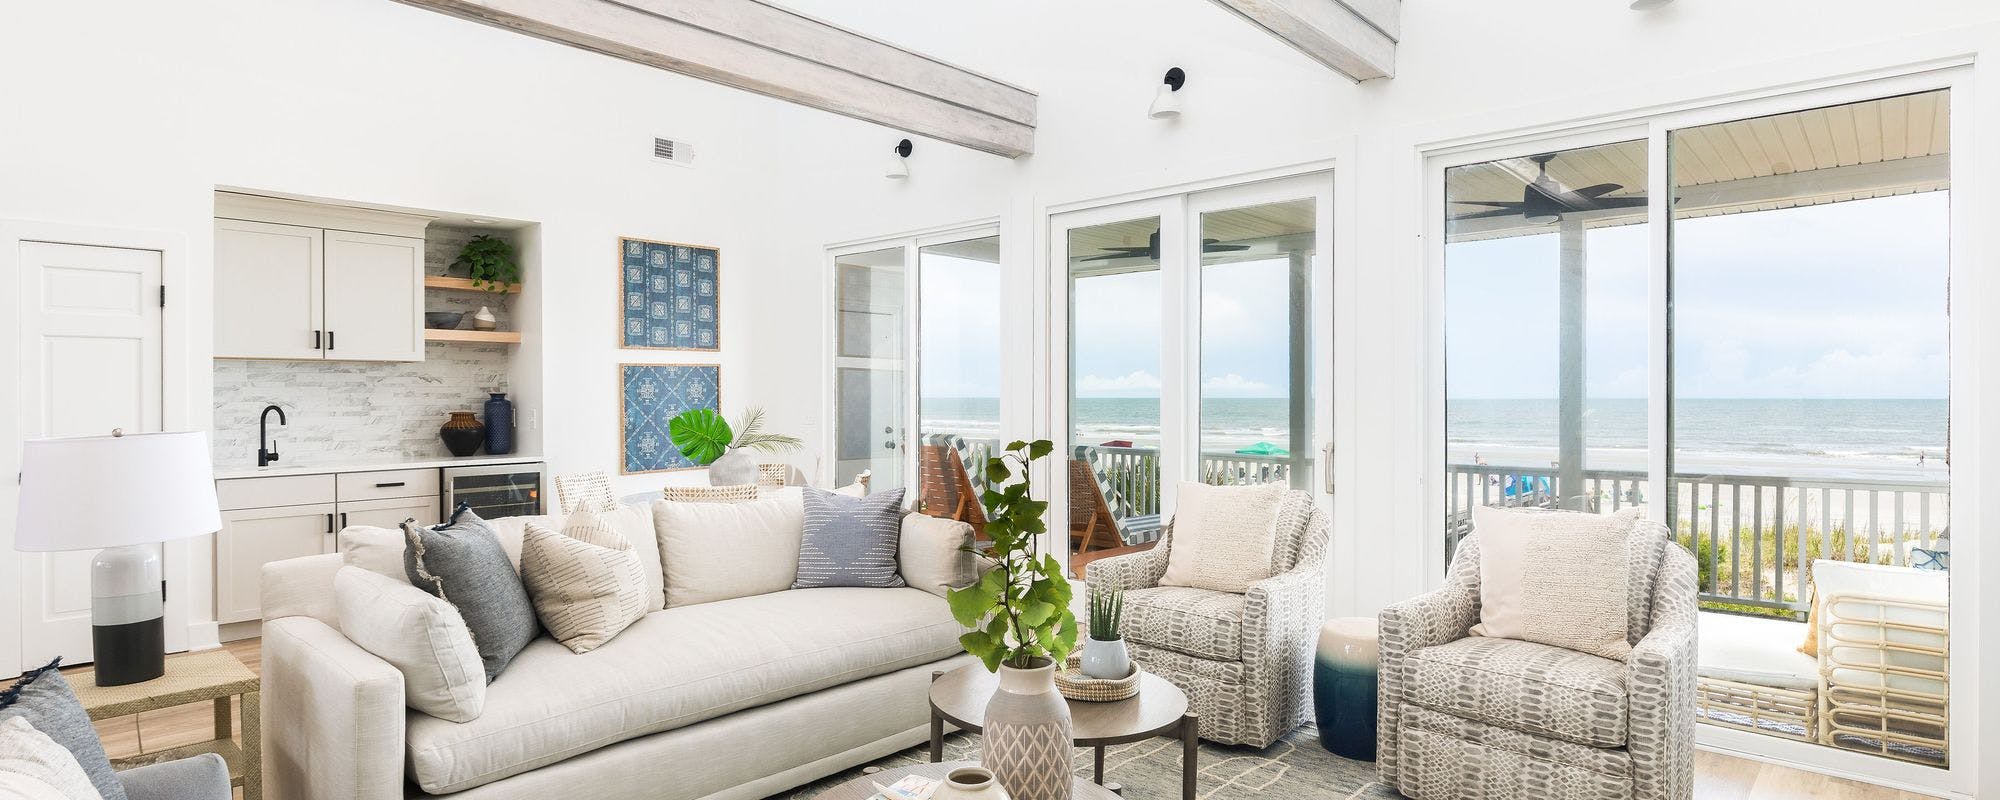 Bright and airy oceanfront vacation rental home on Folly Beach.